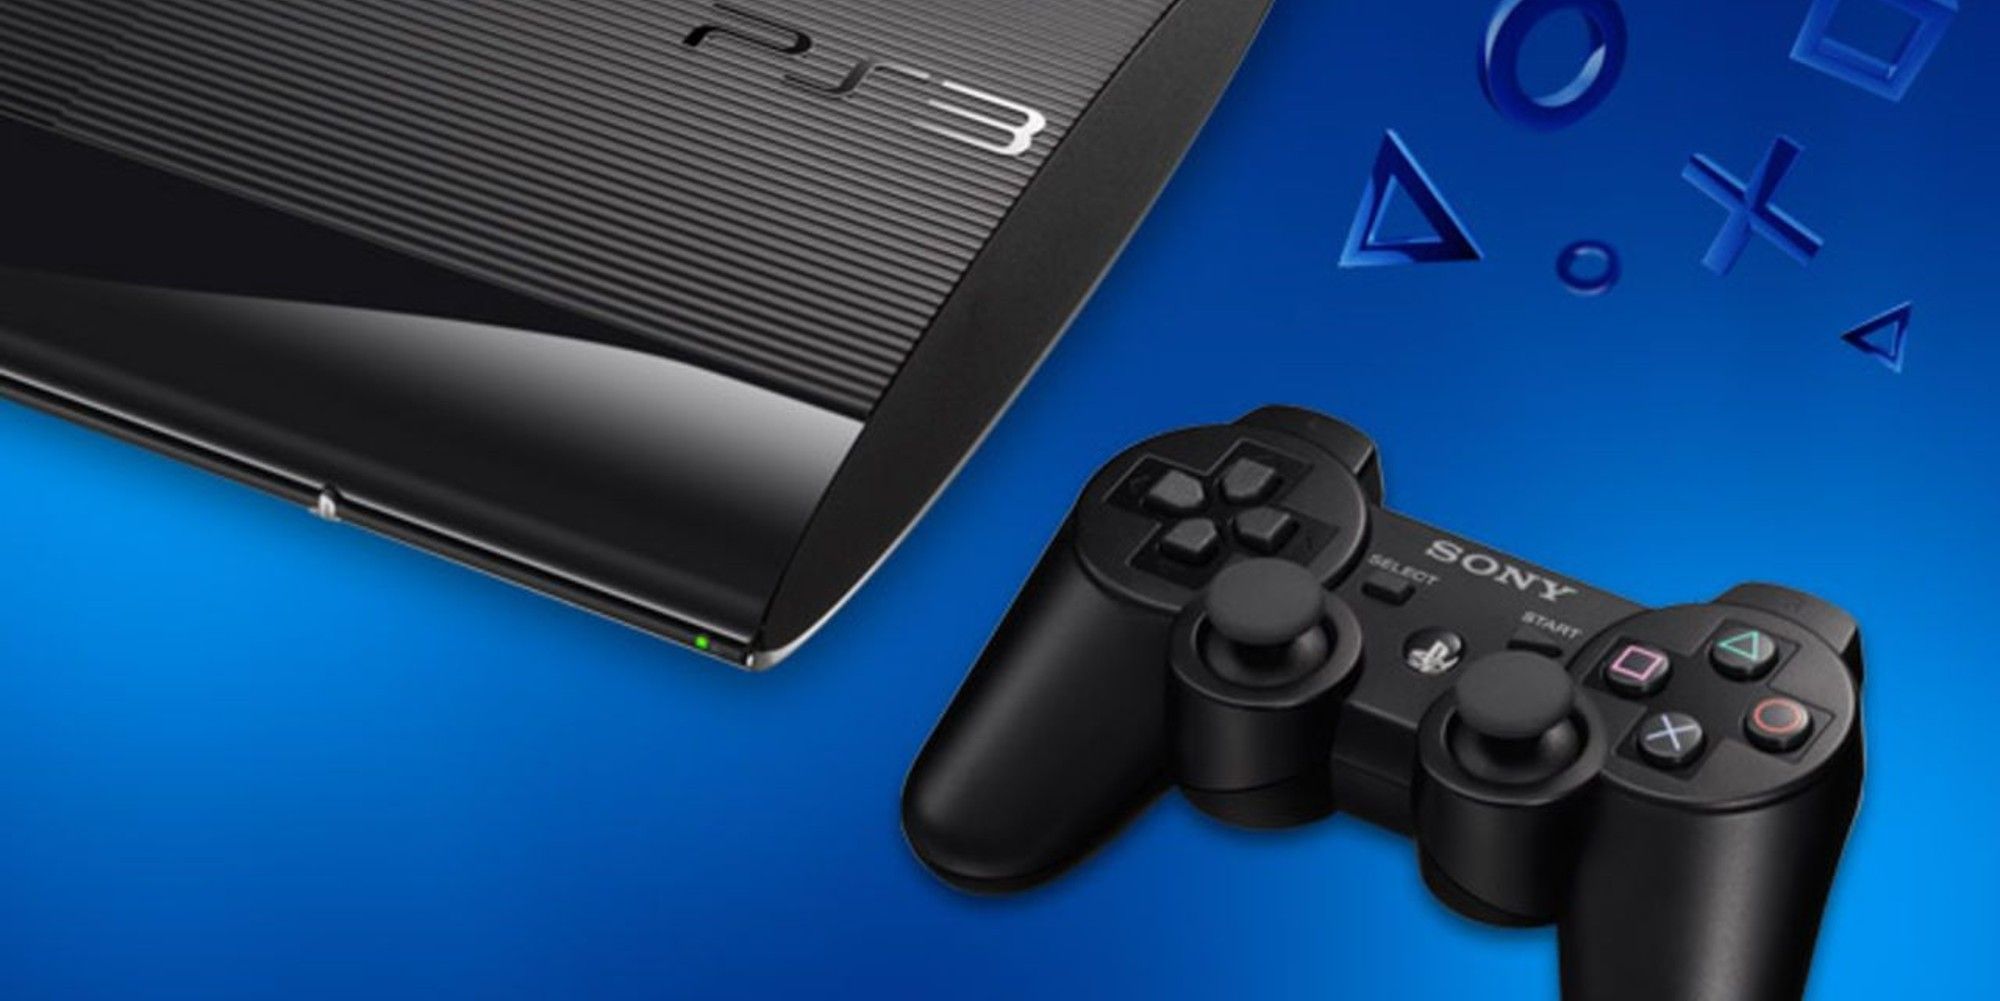 UPDATE] PSN Experiencing Issues on PS4, PS3, and Vita - GameSpot